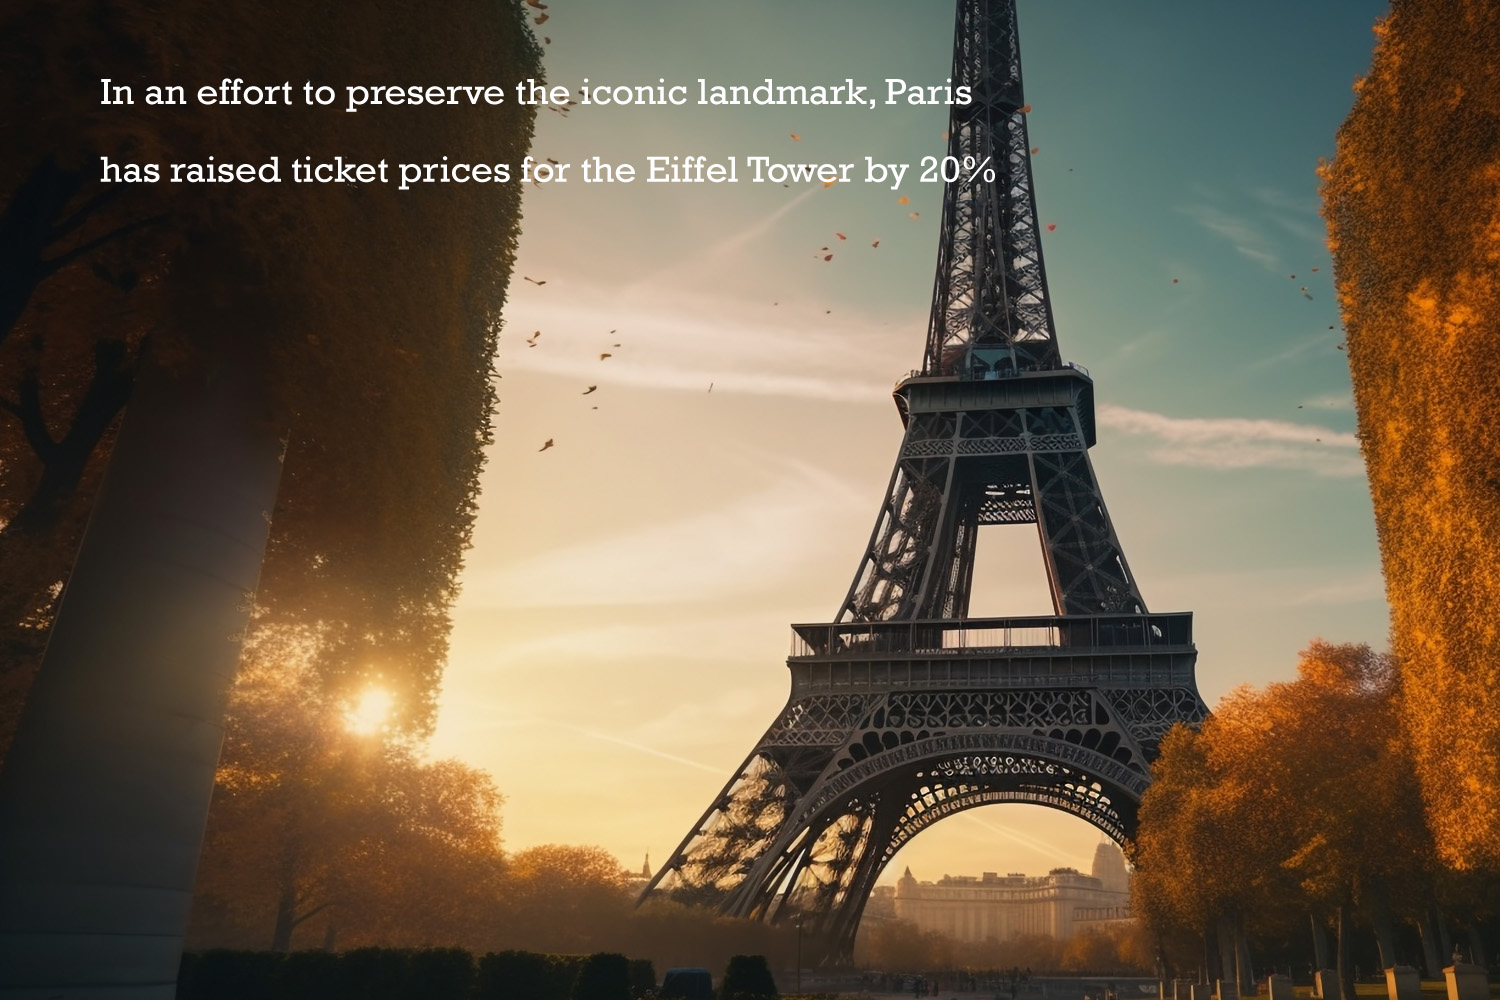 In an effort to preserve the iconic landmark, Paris has raised ticket prices for the Eiffel Tower by 20%.